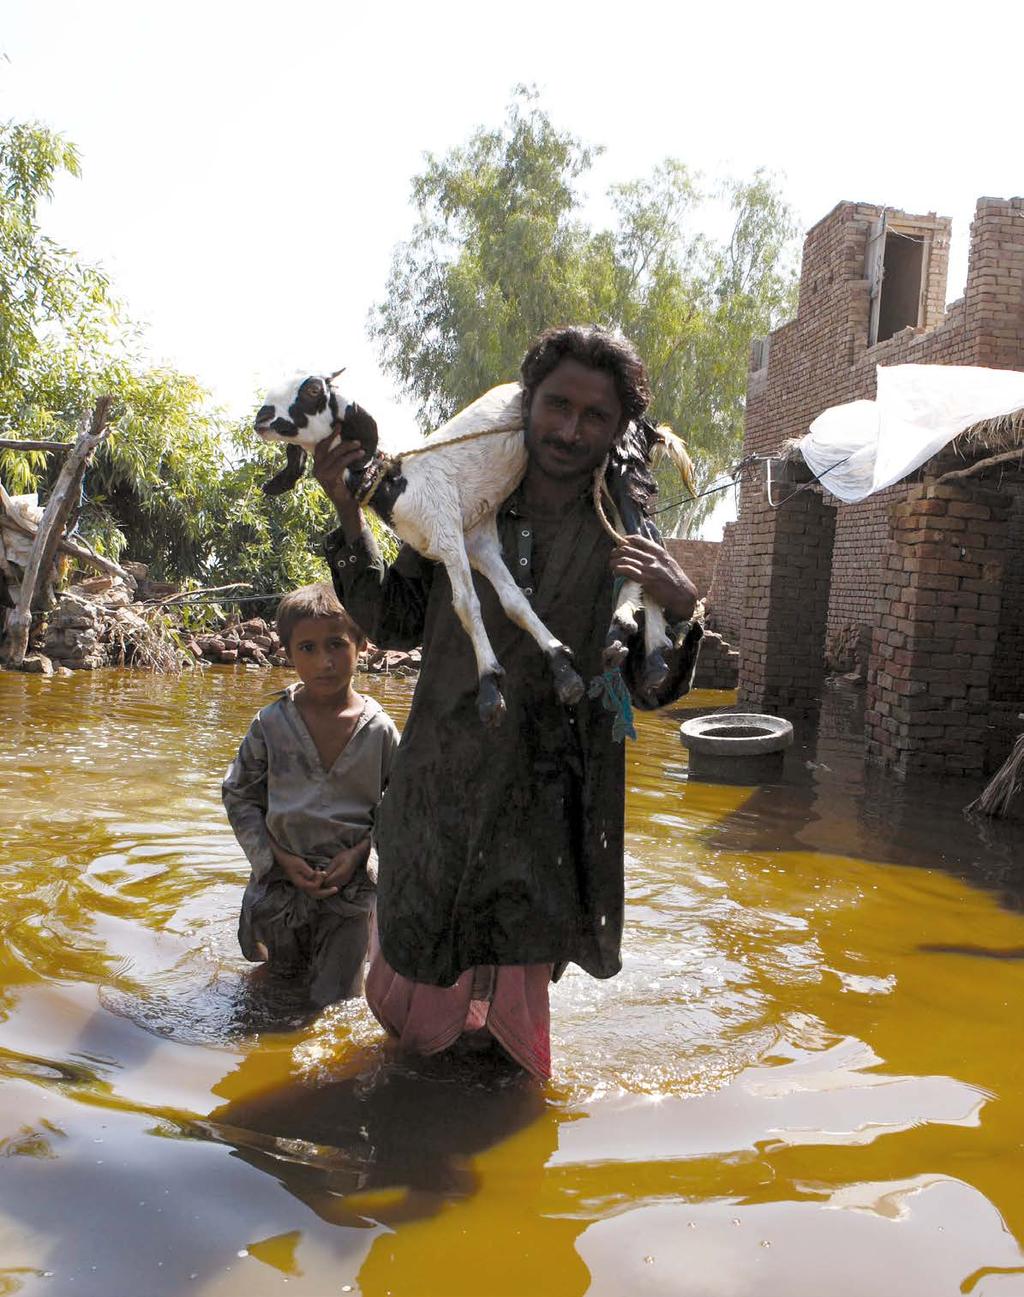 FAO/A. Hafeez The impact of disasters on agriculture is severe, yet under-reported.